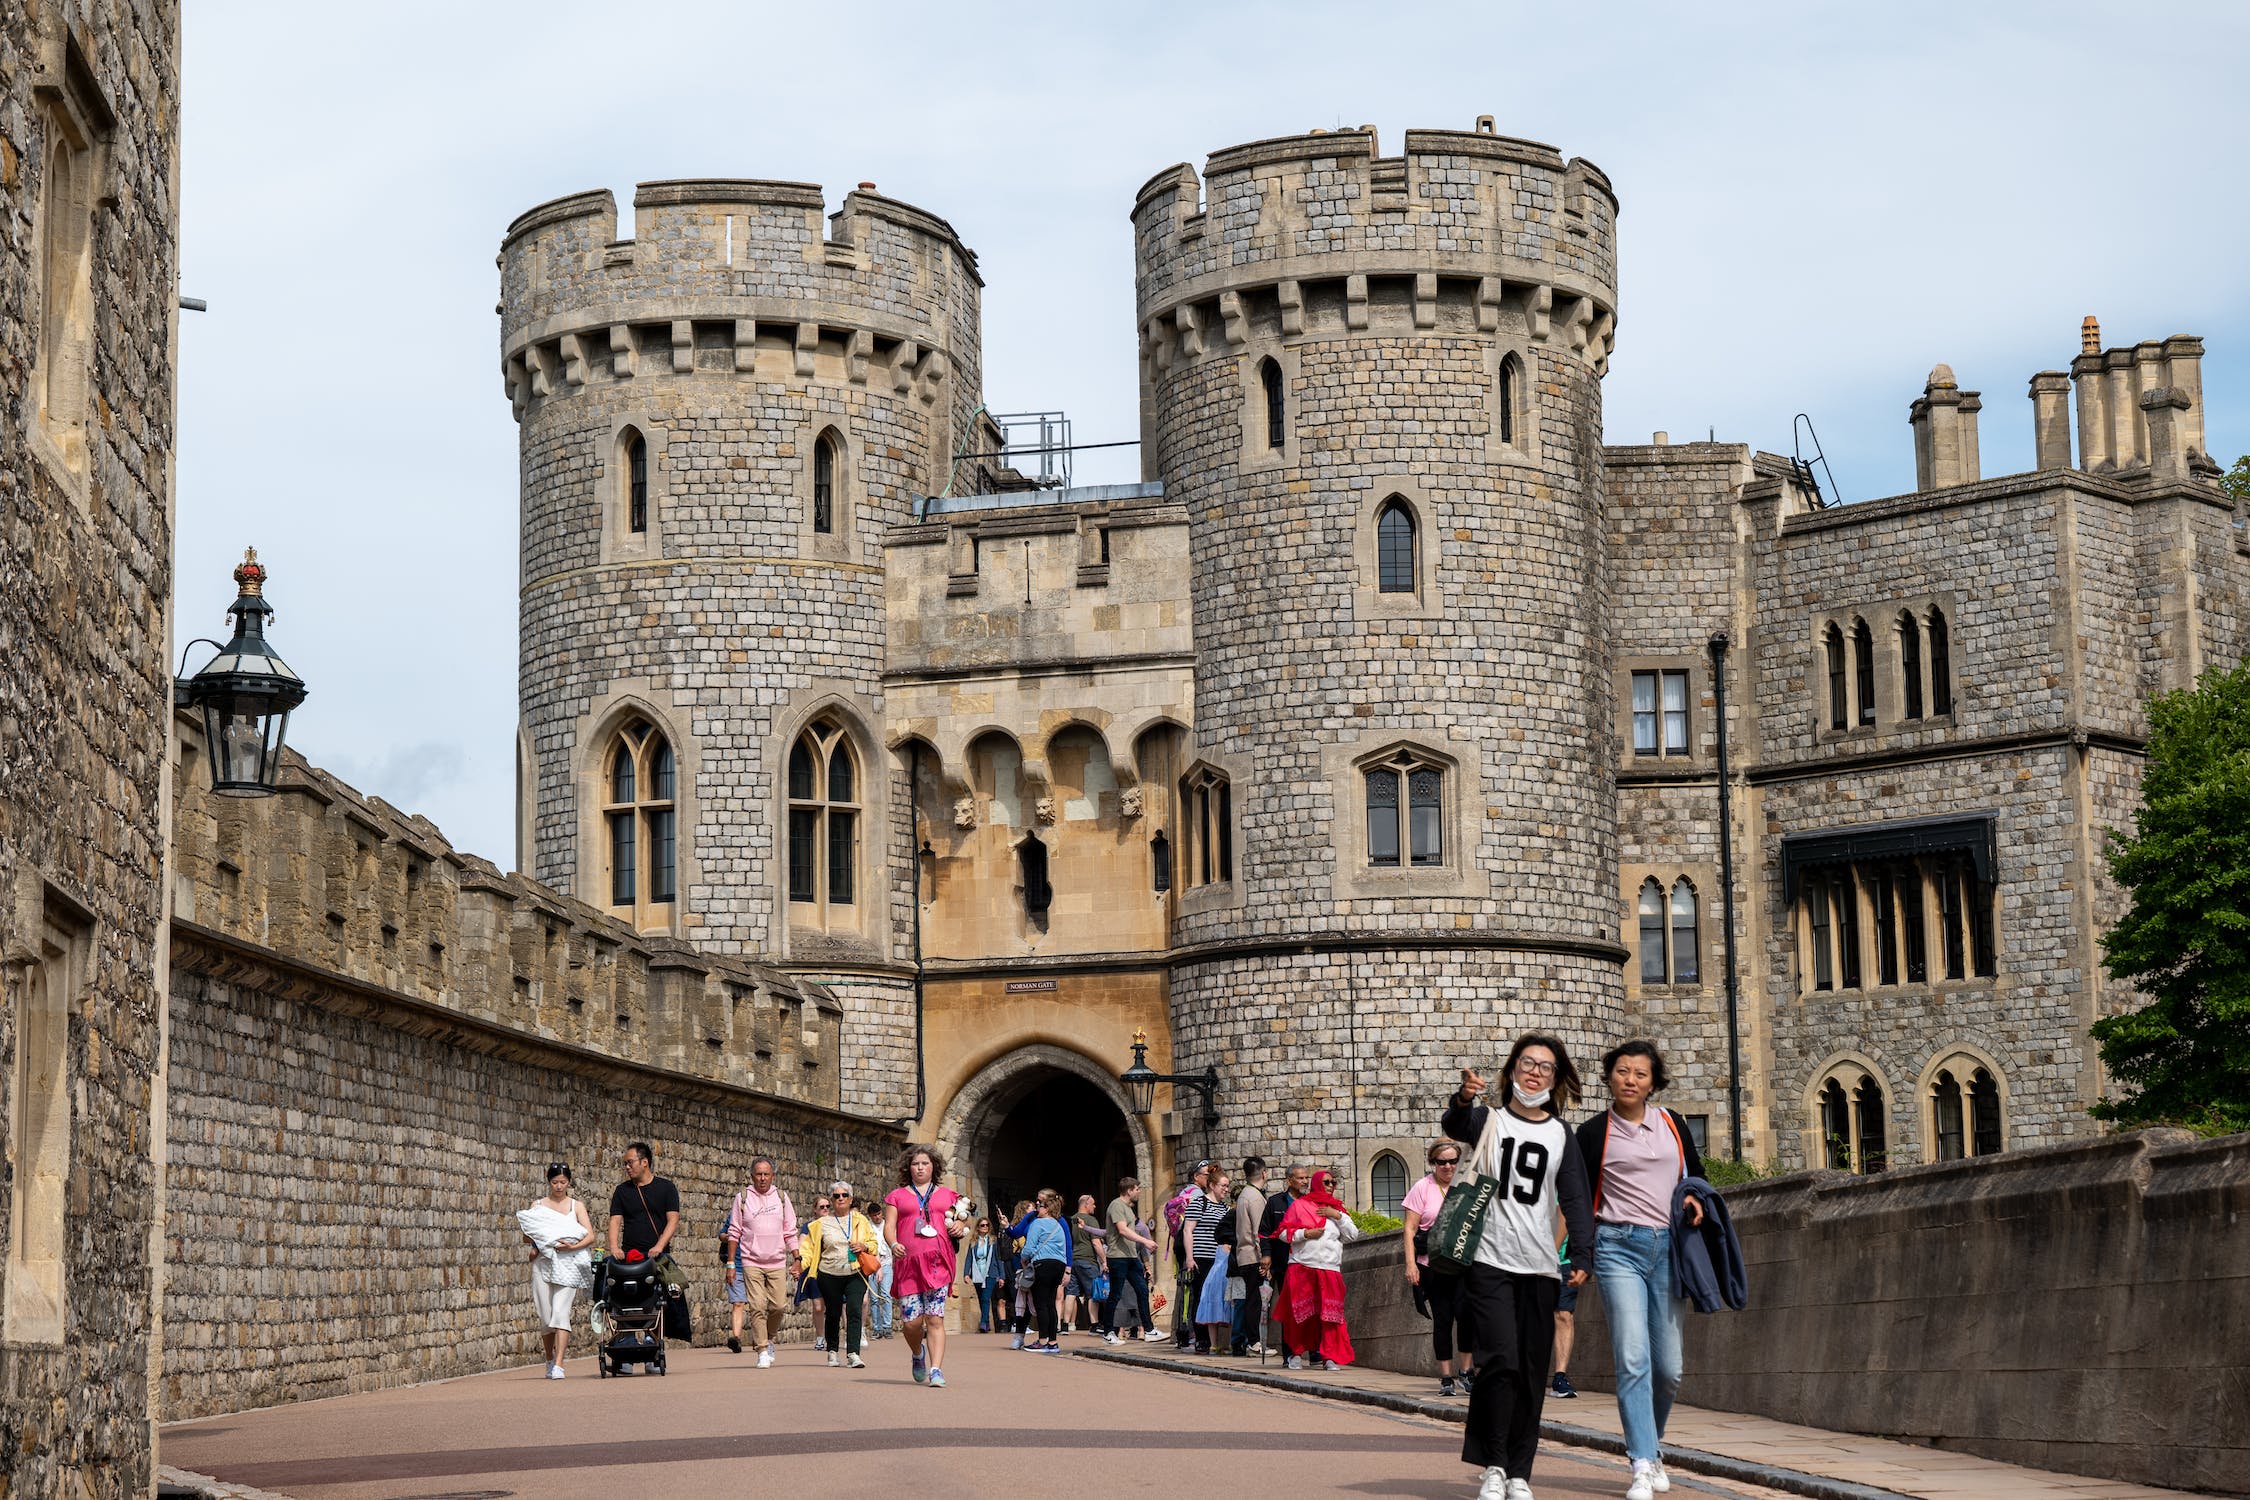 WINDSOR CASTLE TOURS FROM LONDON